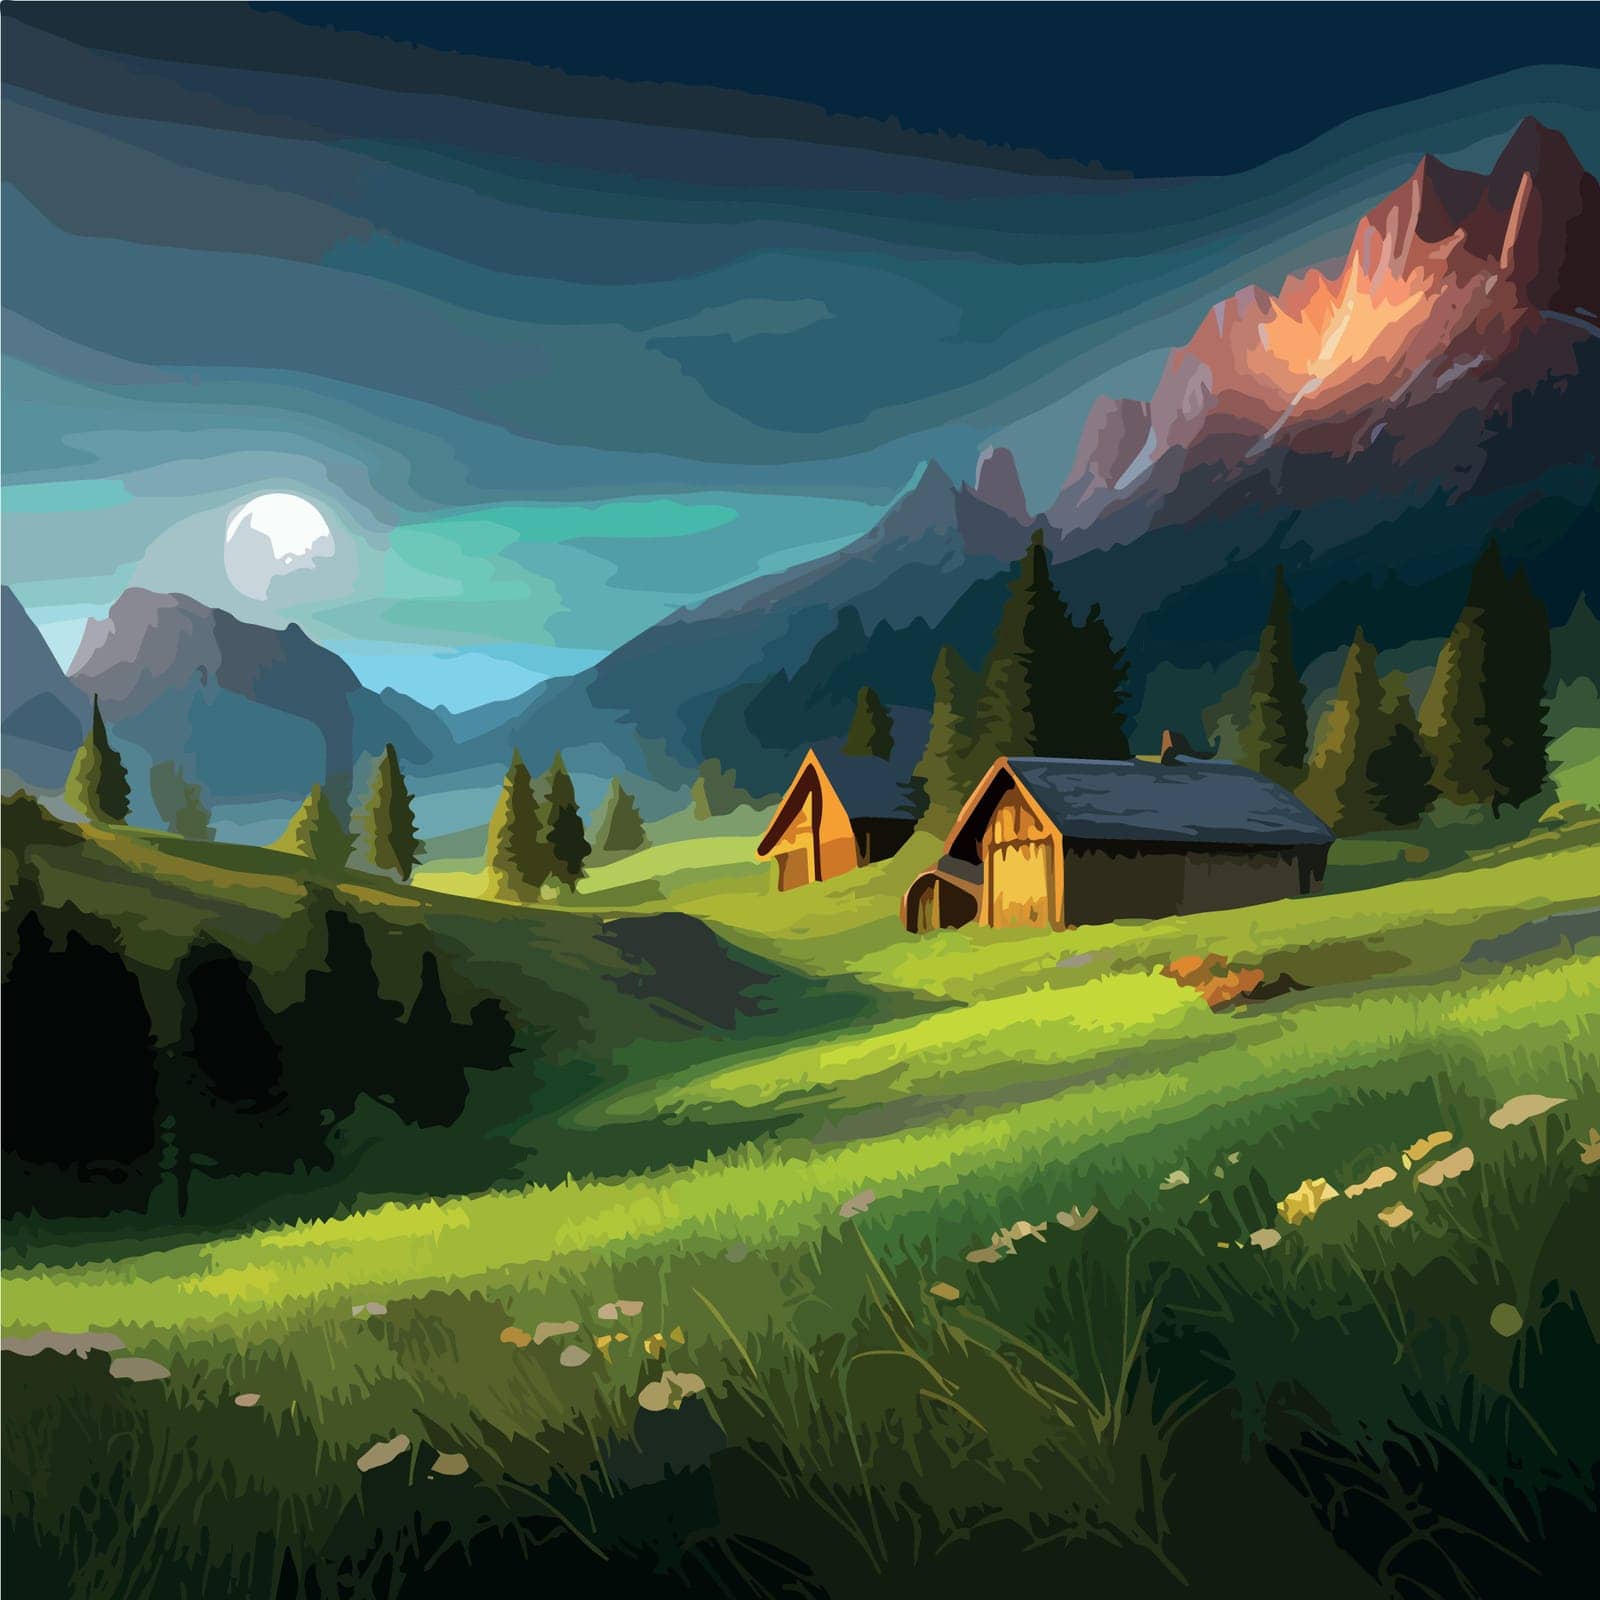 view wood log touristic cabin with mountain in background. rustic landscape vector illustration. by EkaterinaPereslavtseva